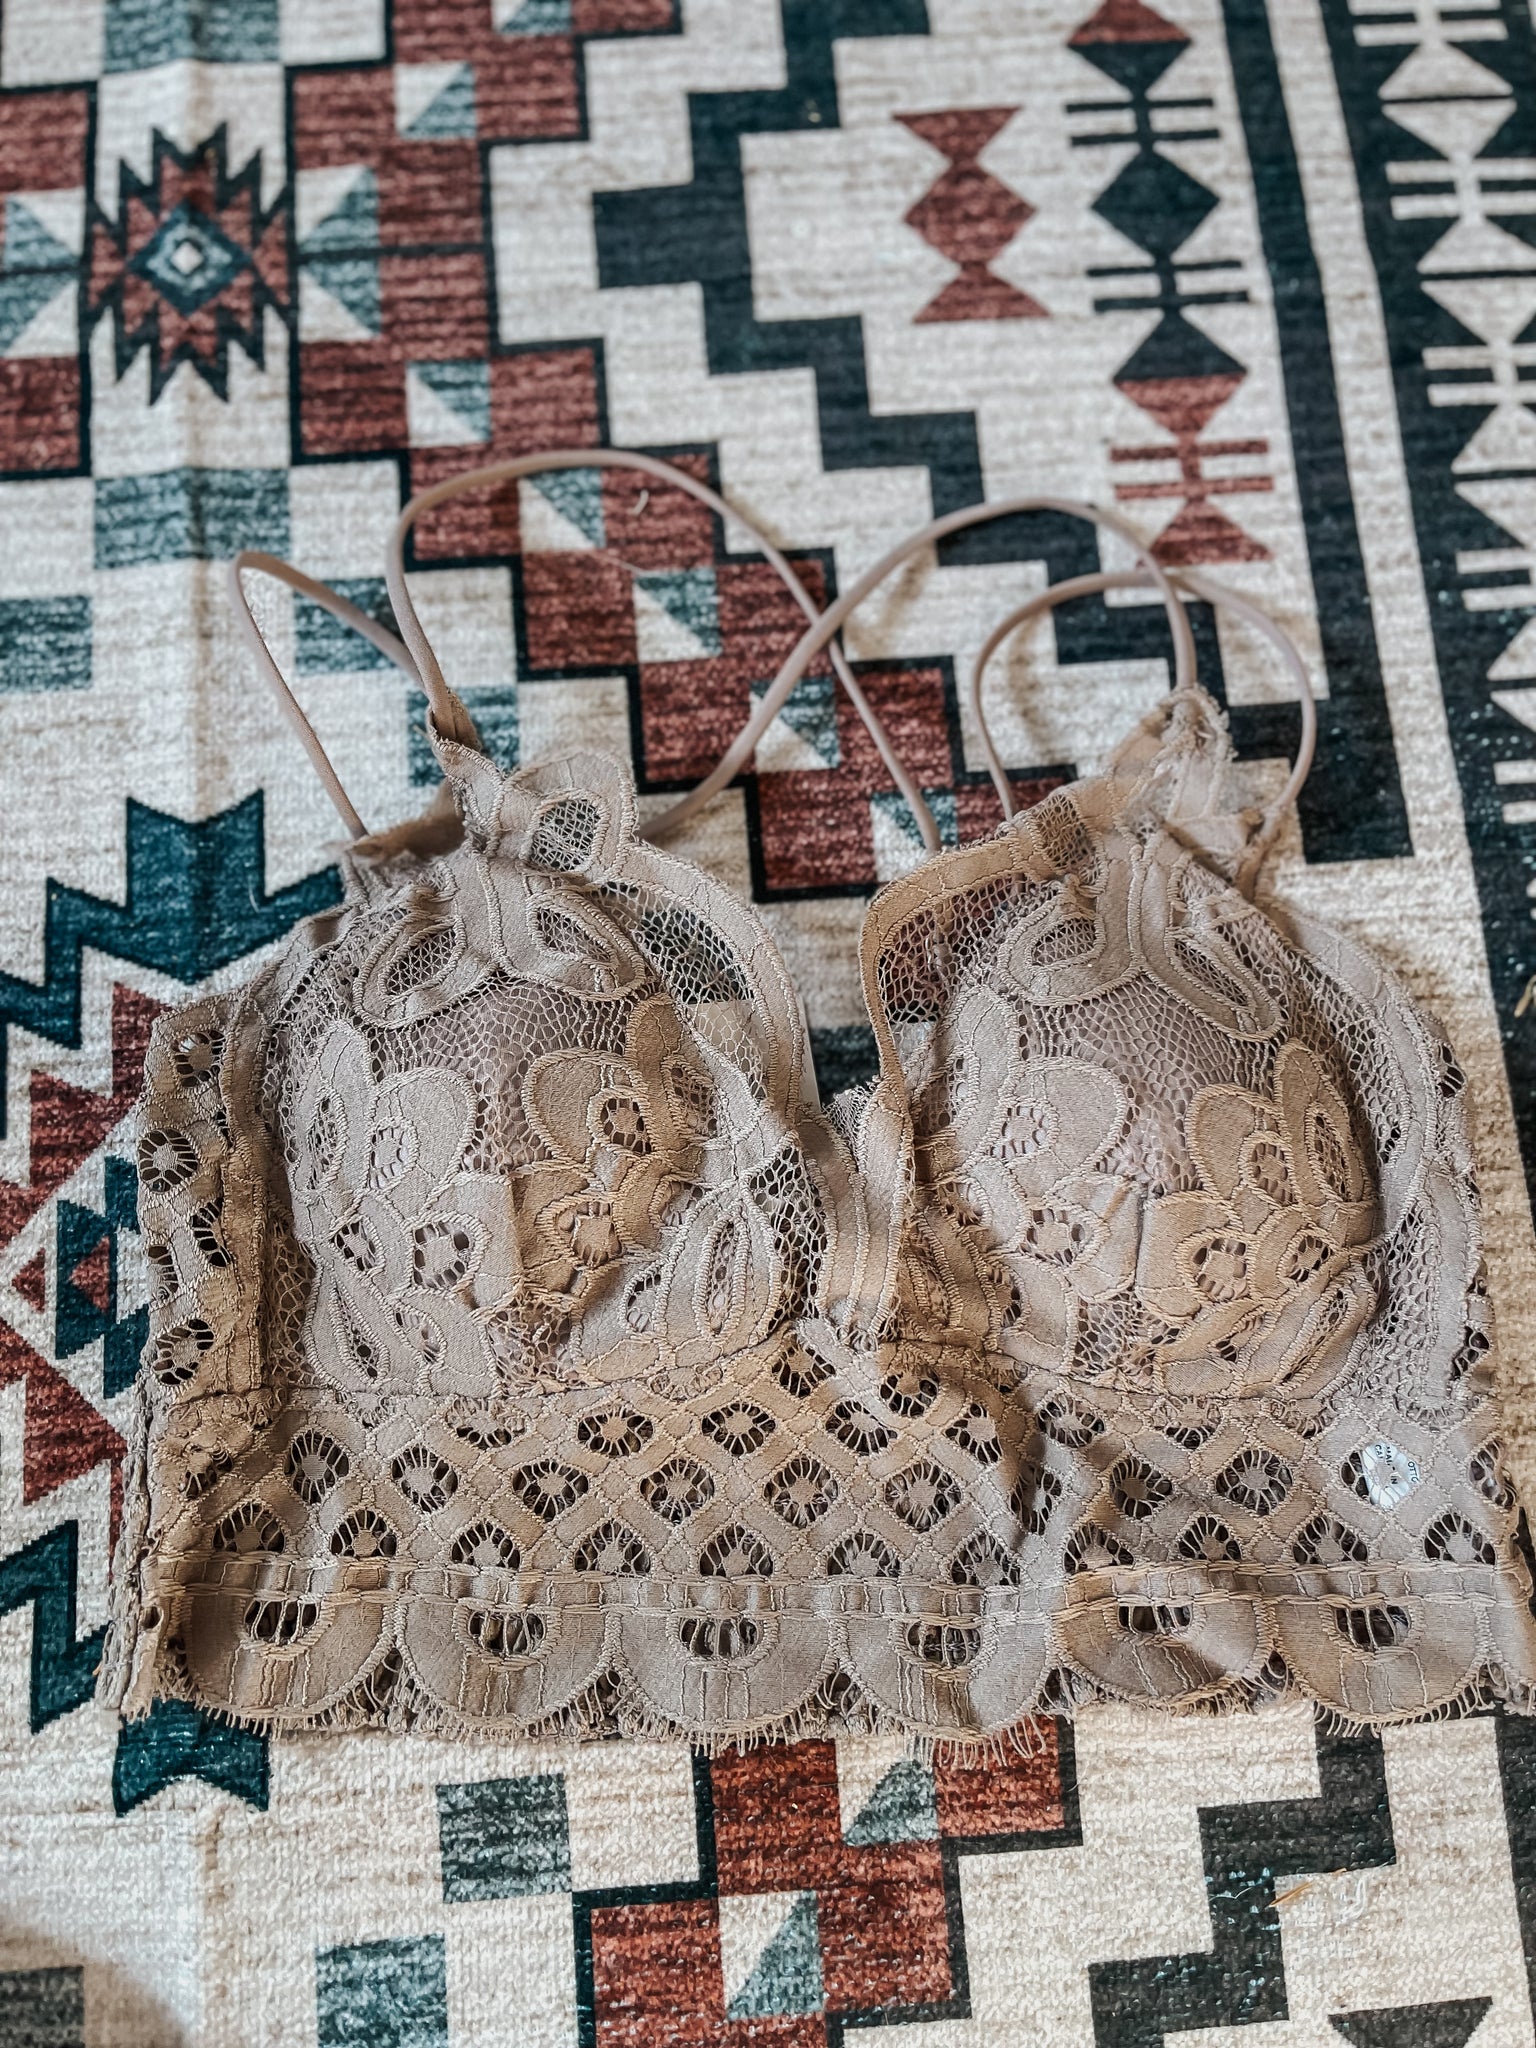 Taupe Lace Bralette